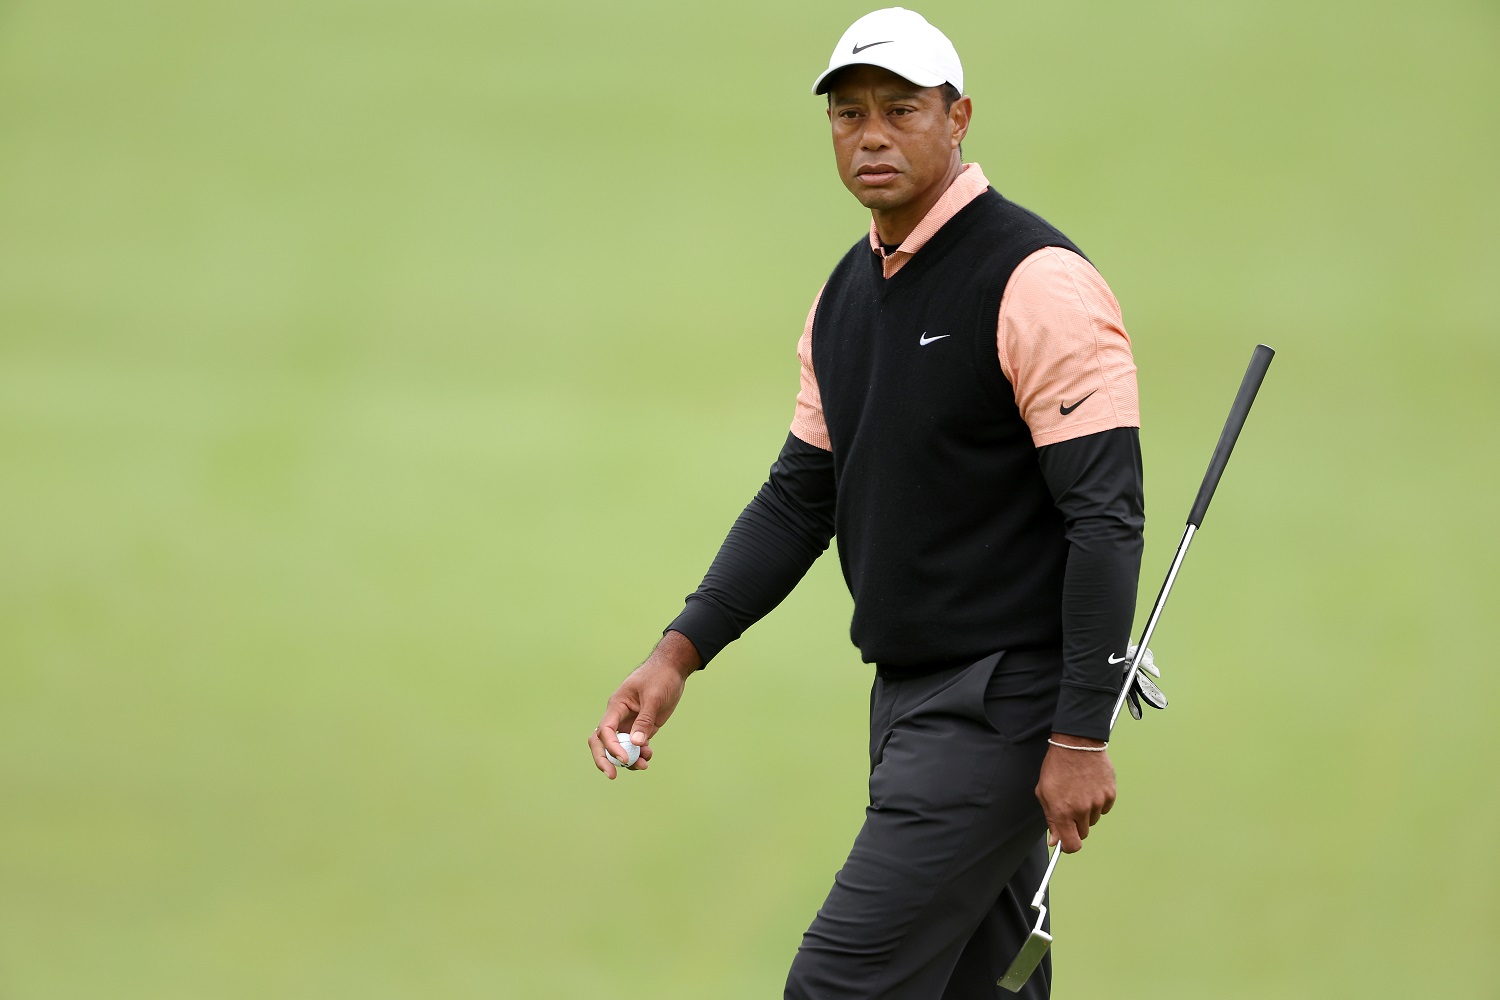 Tiger Woods Can Single-Handedly Devastate the LIV Golf Series With Minimal Effort